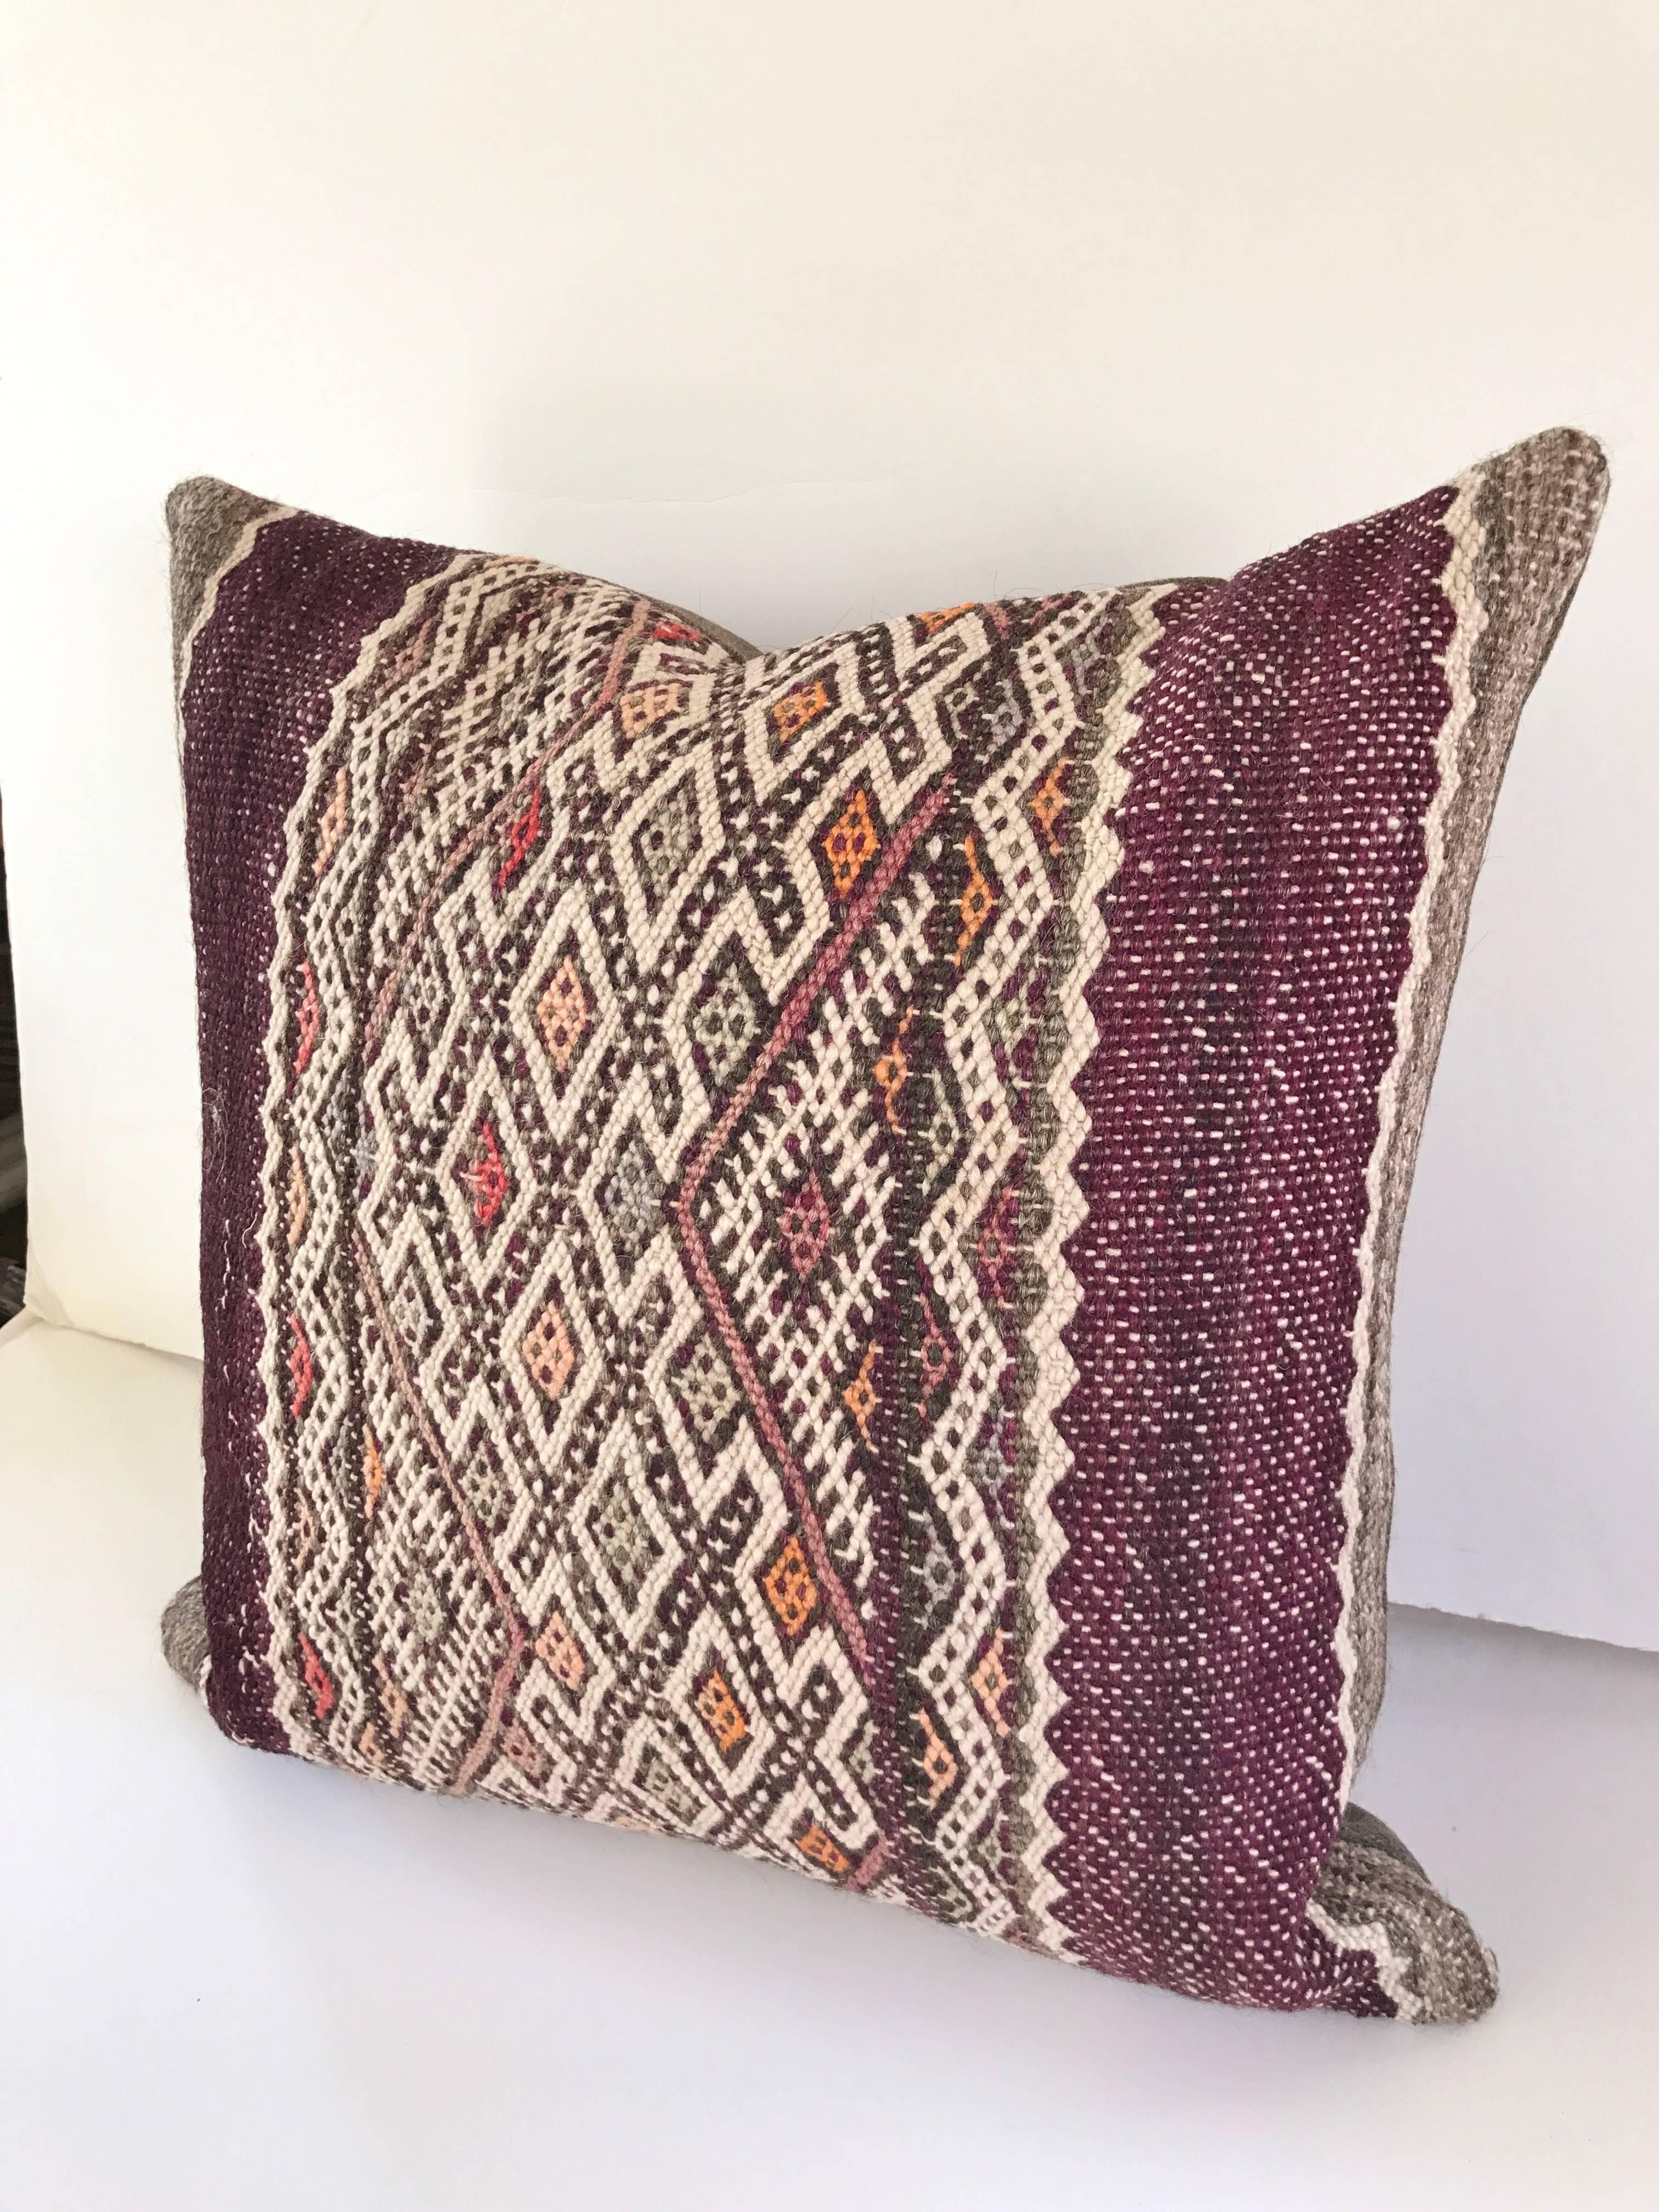 Custom pillows cut from a vintage hand loomed wool Moroccan Berber rug from the Atlas Mountains. Color is all natural with bands of deep purple and multi colored tribal designs. Pillow is backed in a grey wool, filled with an insert of 50/50 down